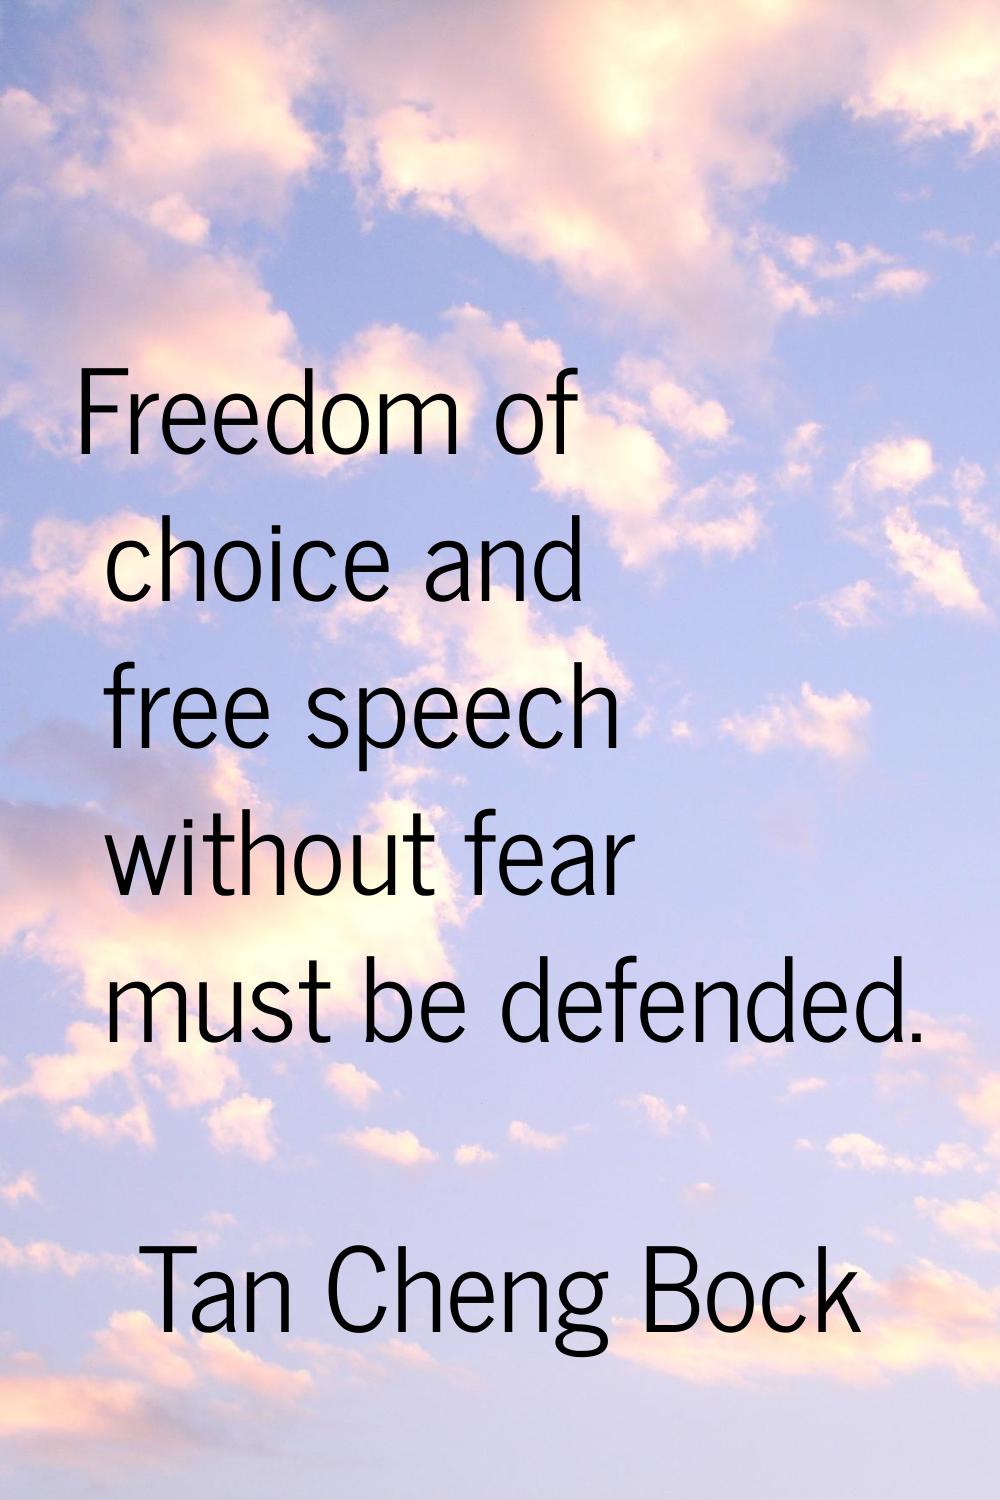 Freedom of choice and free speech without fear must be defended.